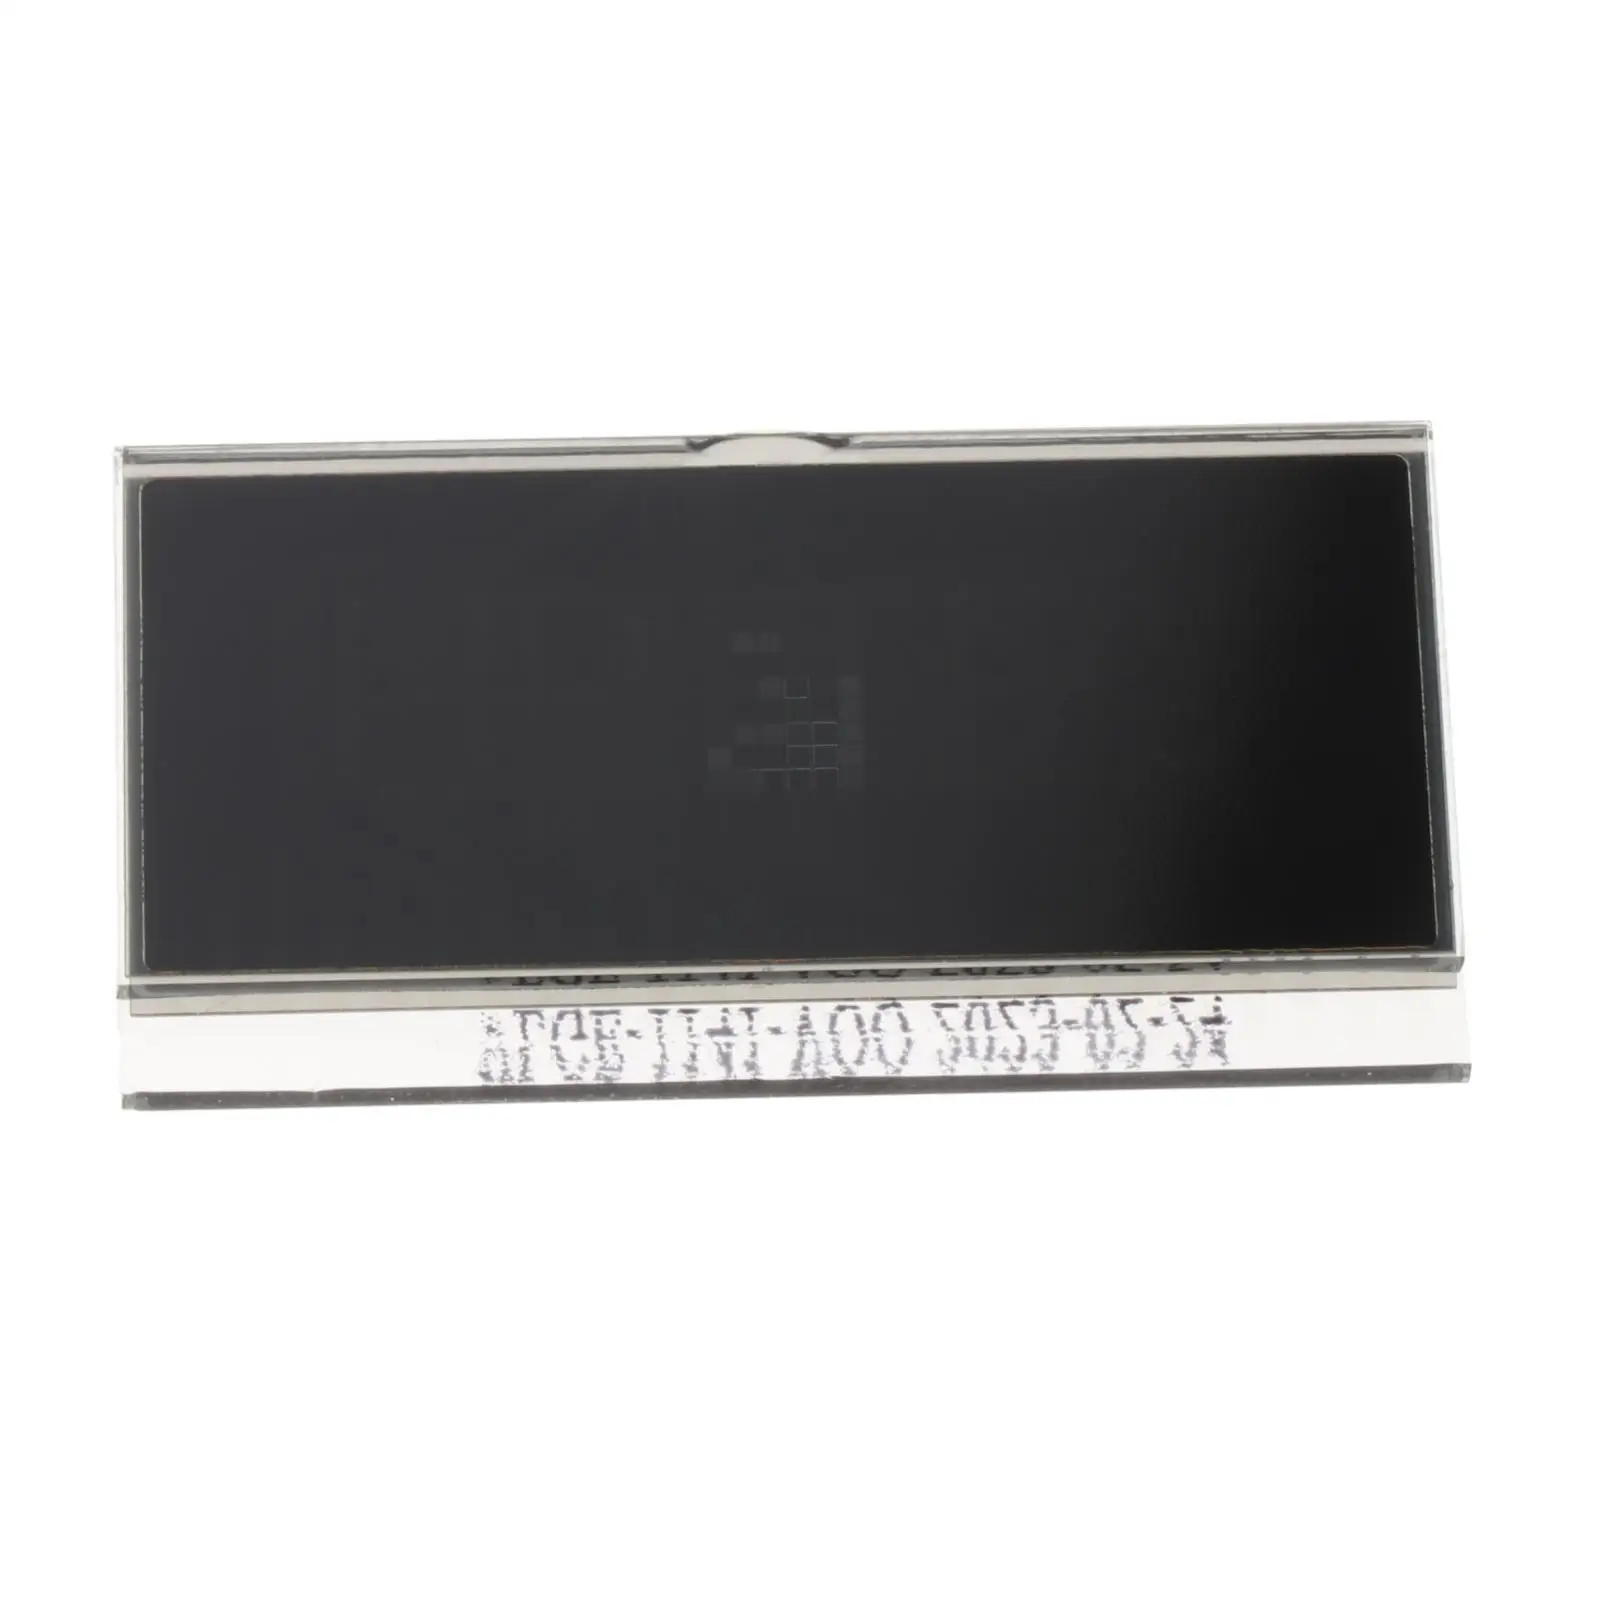 LCD Display Screen Air Conditioning Pixel Repair Professional Replace Parts High Performance for Audi A6 4F Q7 4L Accessory